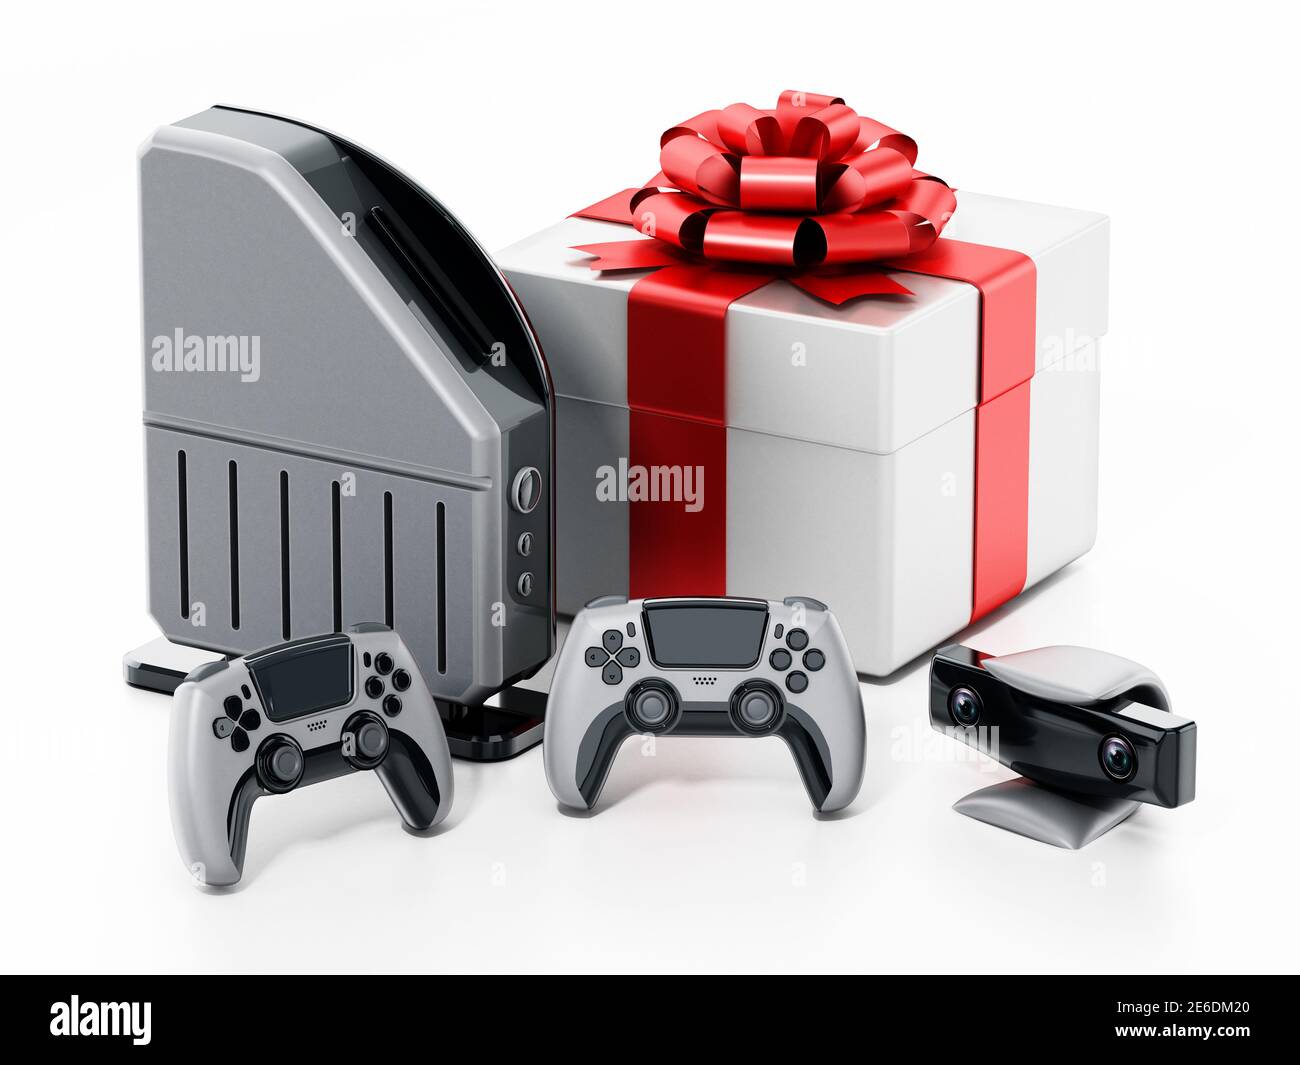 Giftbox standing next to generic video game console, controllers and camera. 3D illustration. Stock Photo